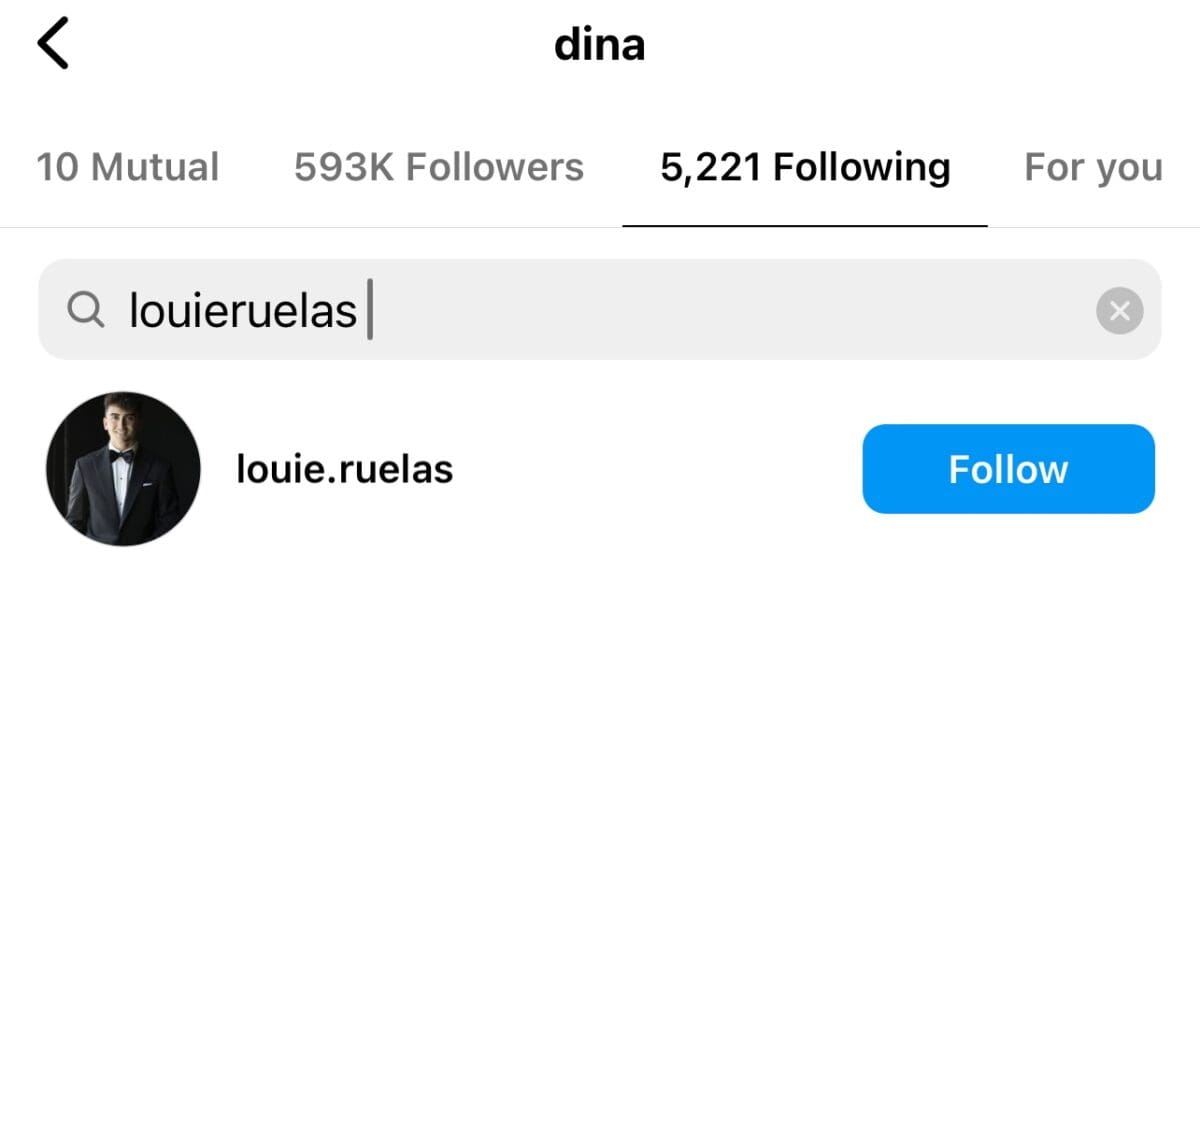 Dina Manzo continues to follow Louie Ruelas' son on Instagram